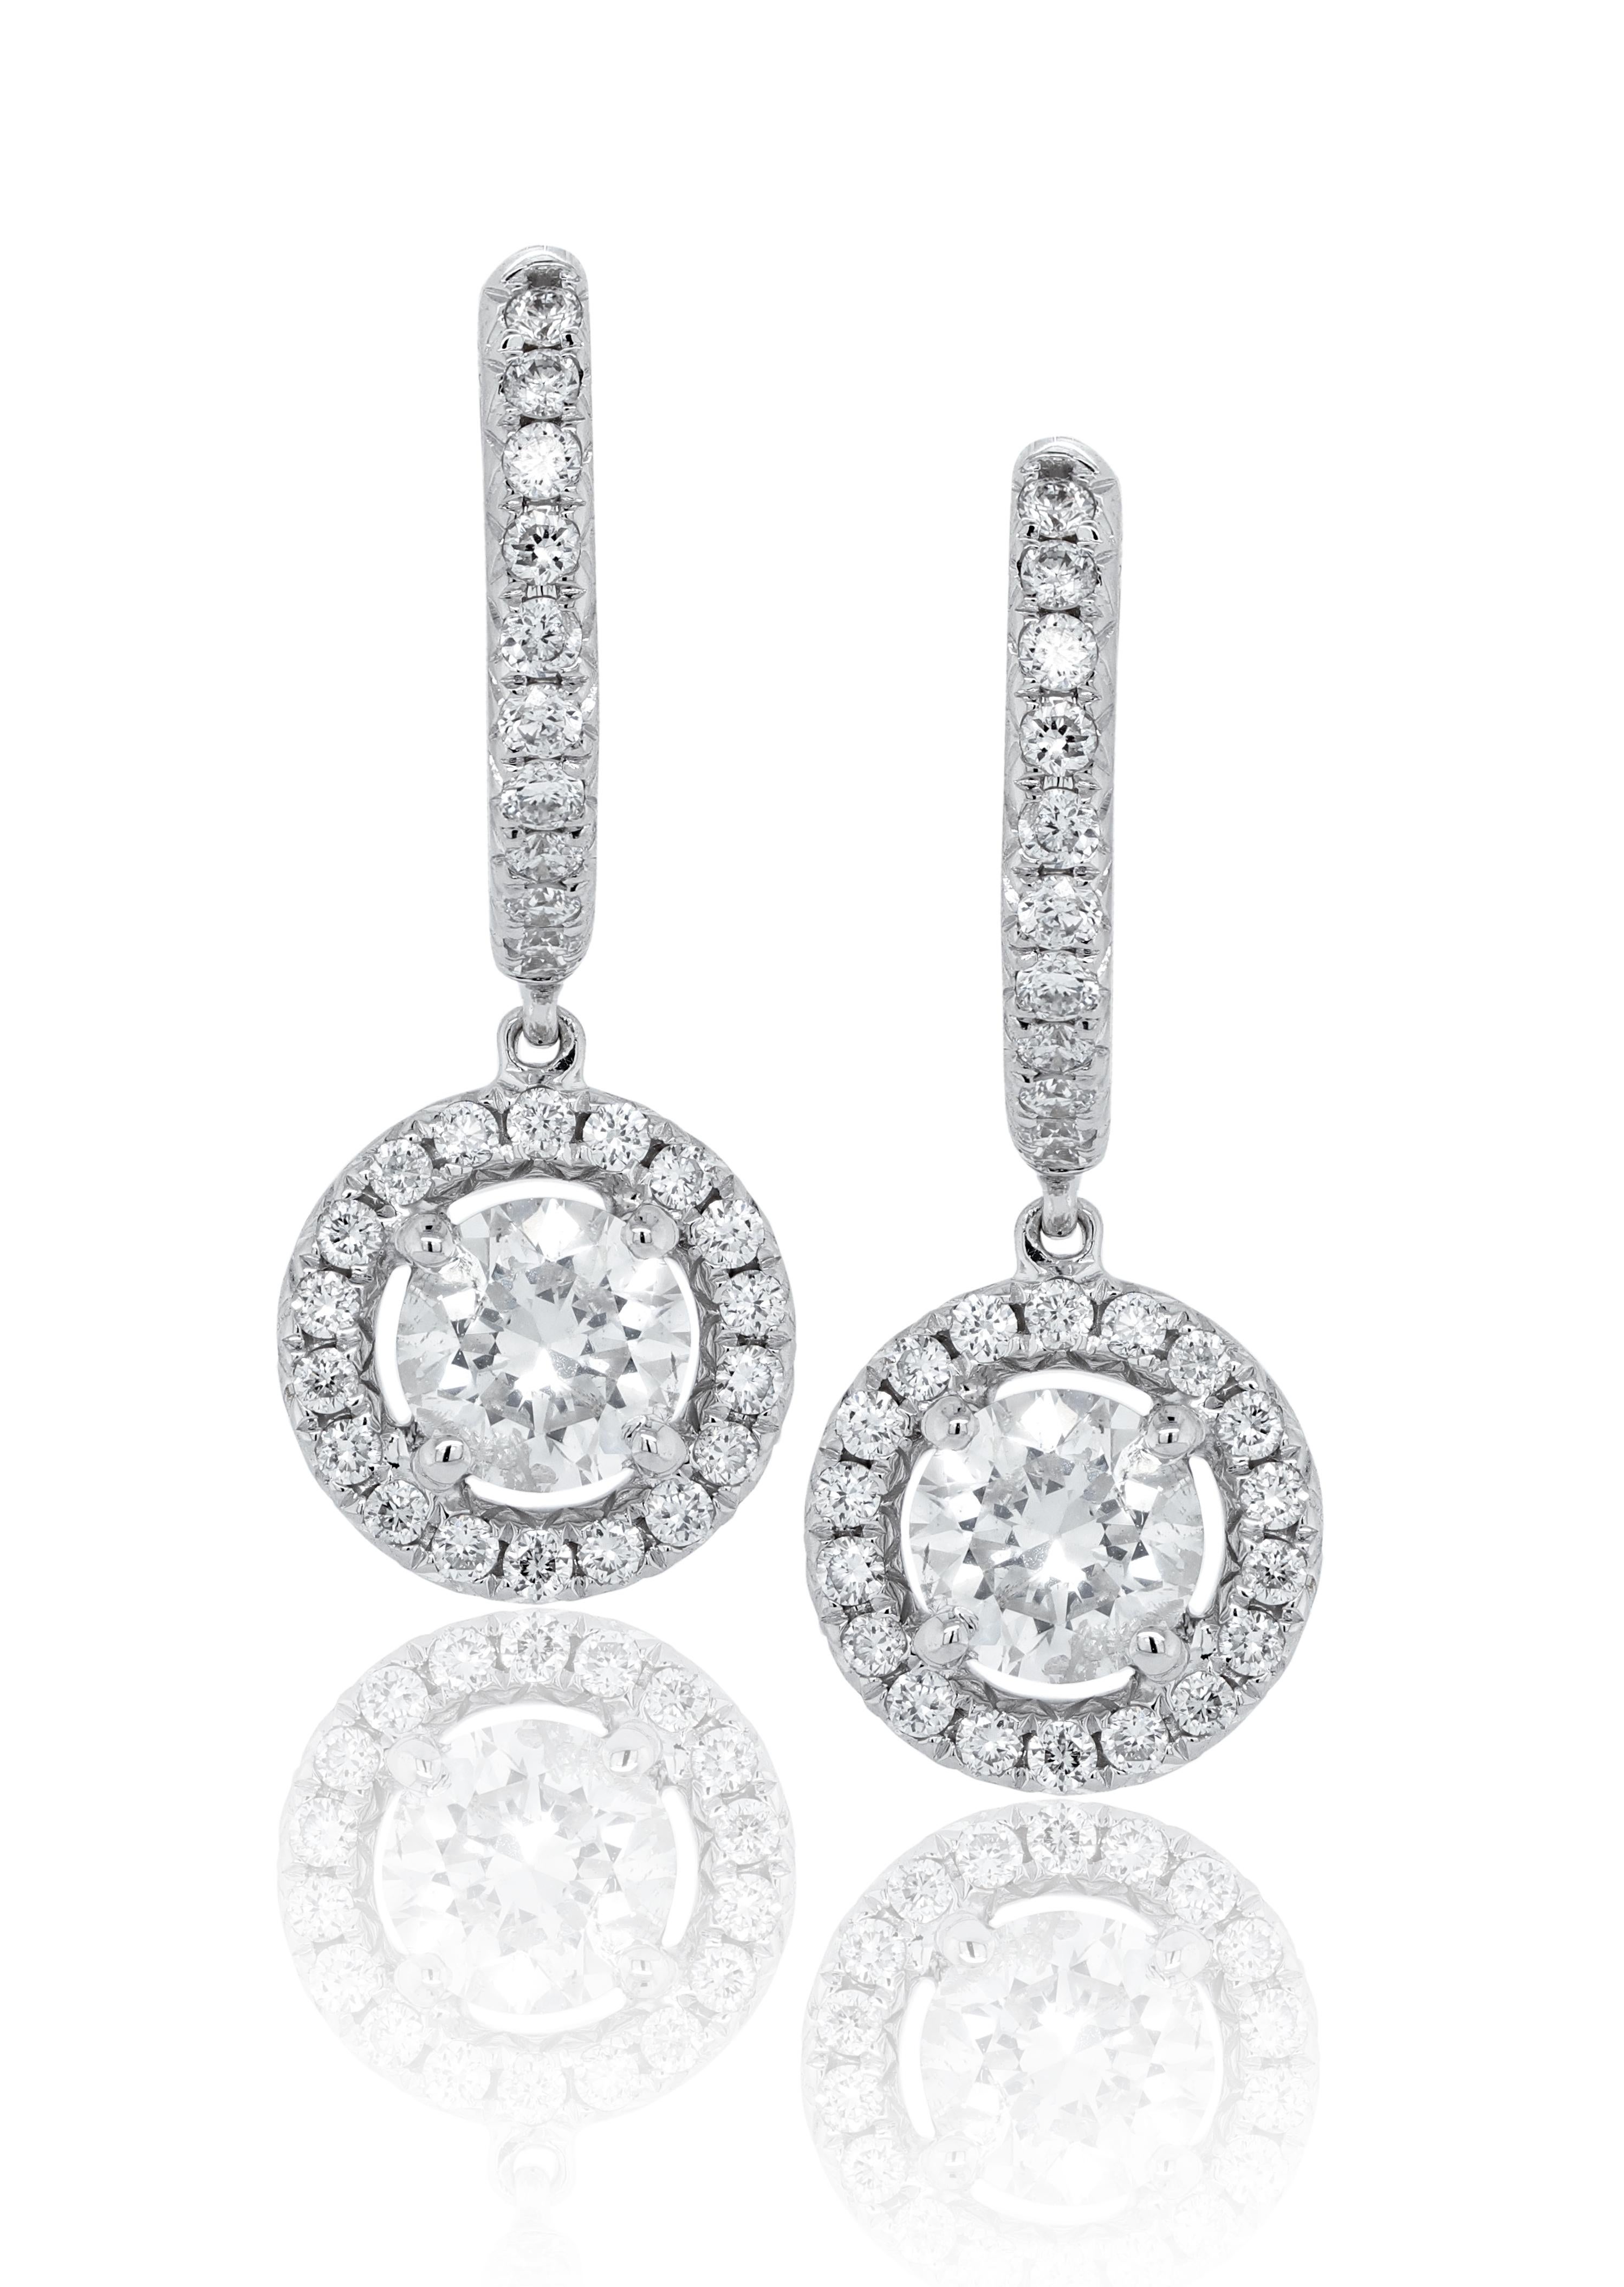 Round Cut Diana M. 14kt white gold hanging earrings featuring 1.20 cts tw of round diamond For Sale